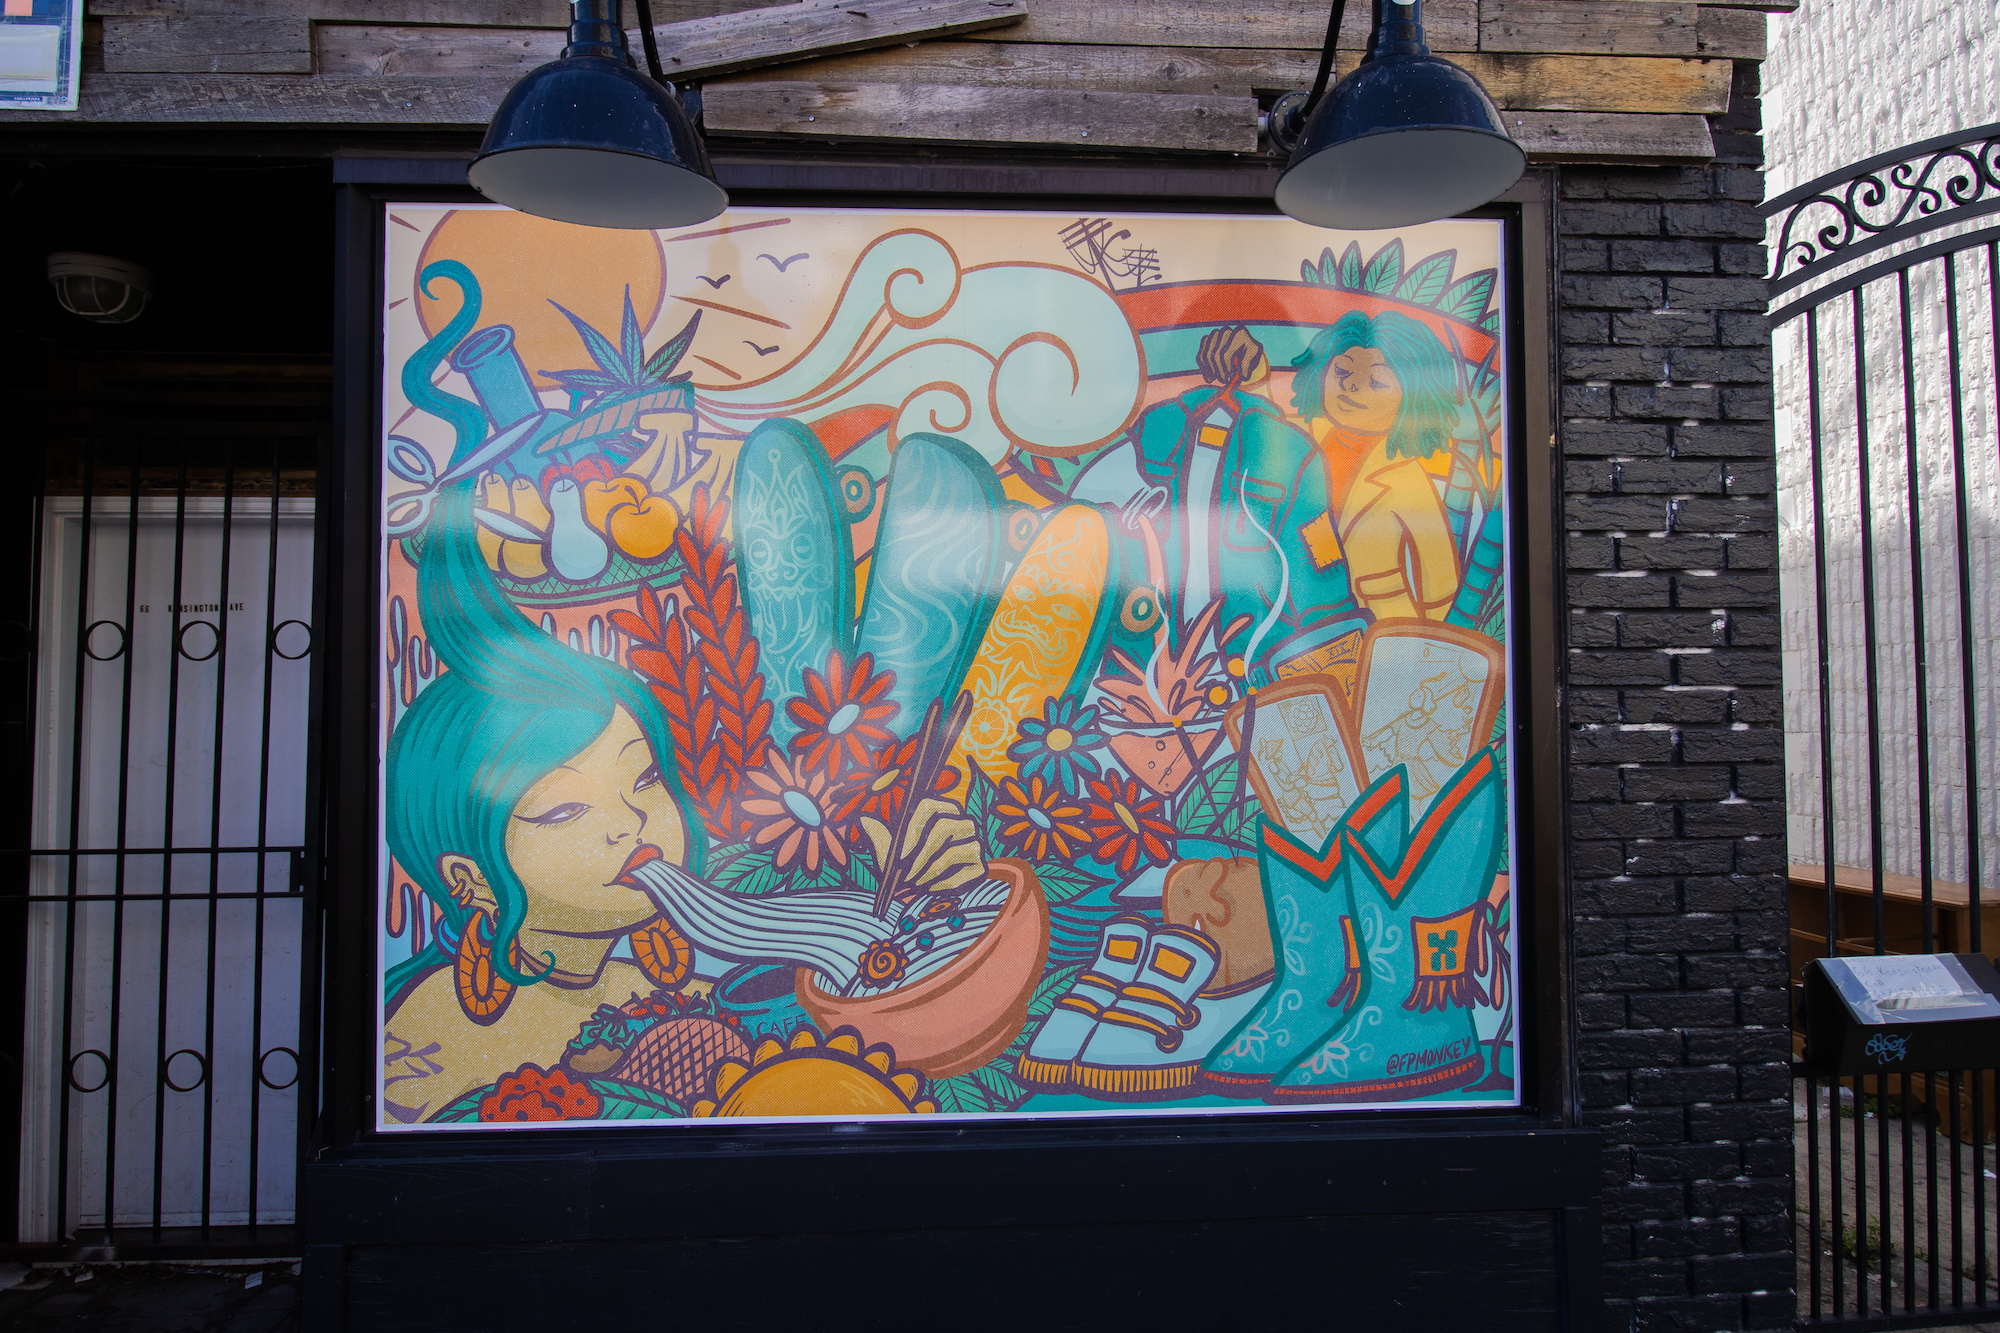 A large window installation with a colourful digital mural by artist FP Monkey. The artwork is in warm golden colours with fun characters, foods, clothing, and other symbols of Toronto's Kensington Market neighbourhood